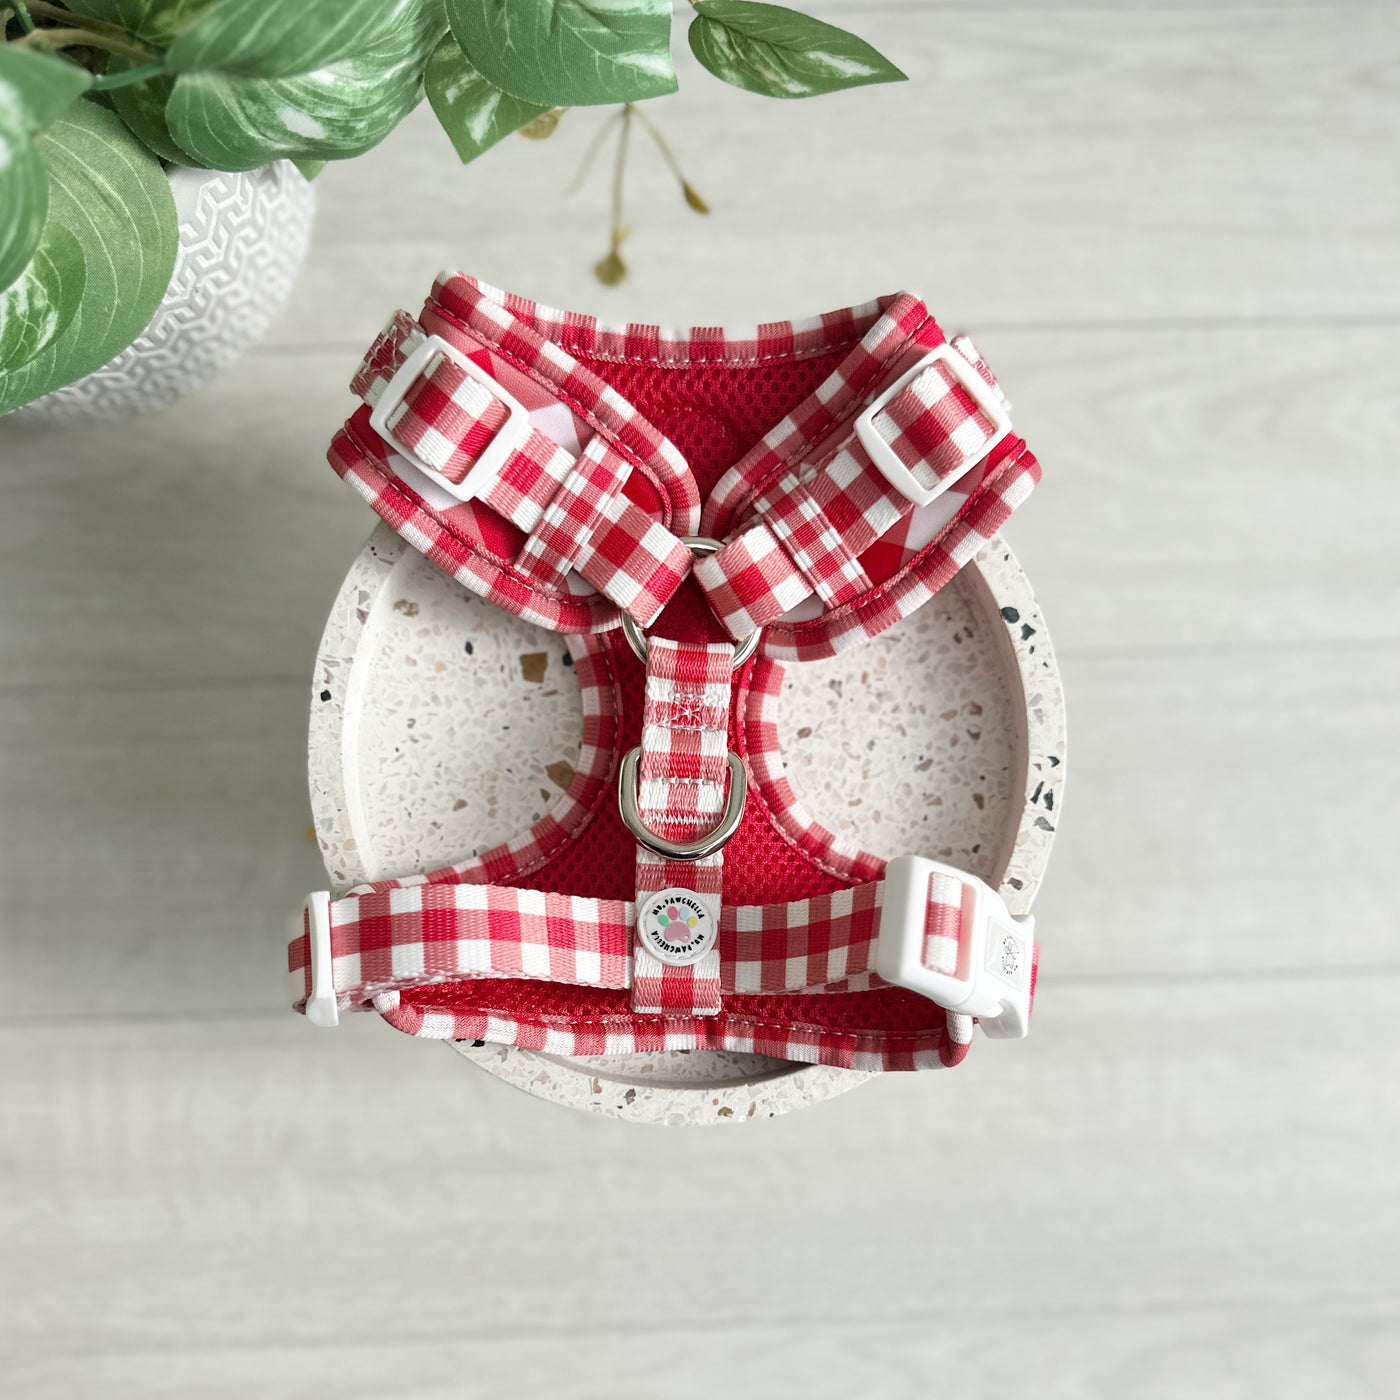 Adjustable harness - Berry picnic